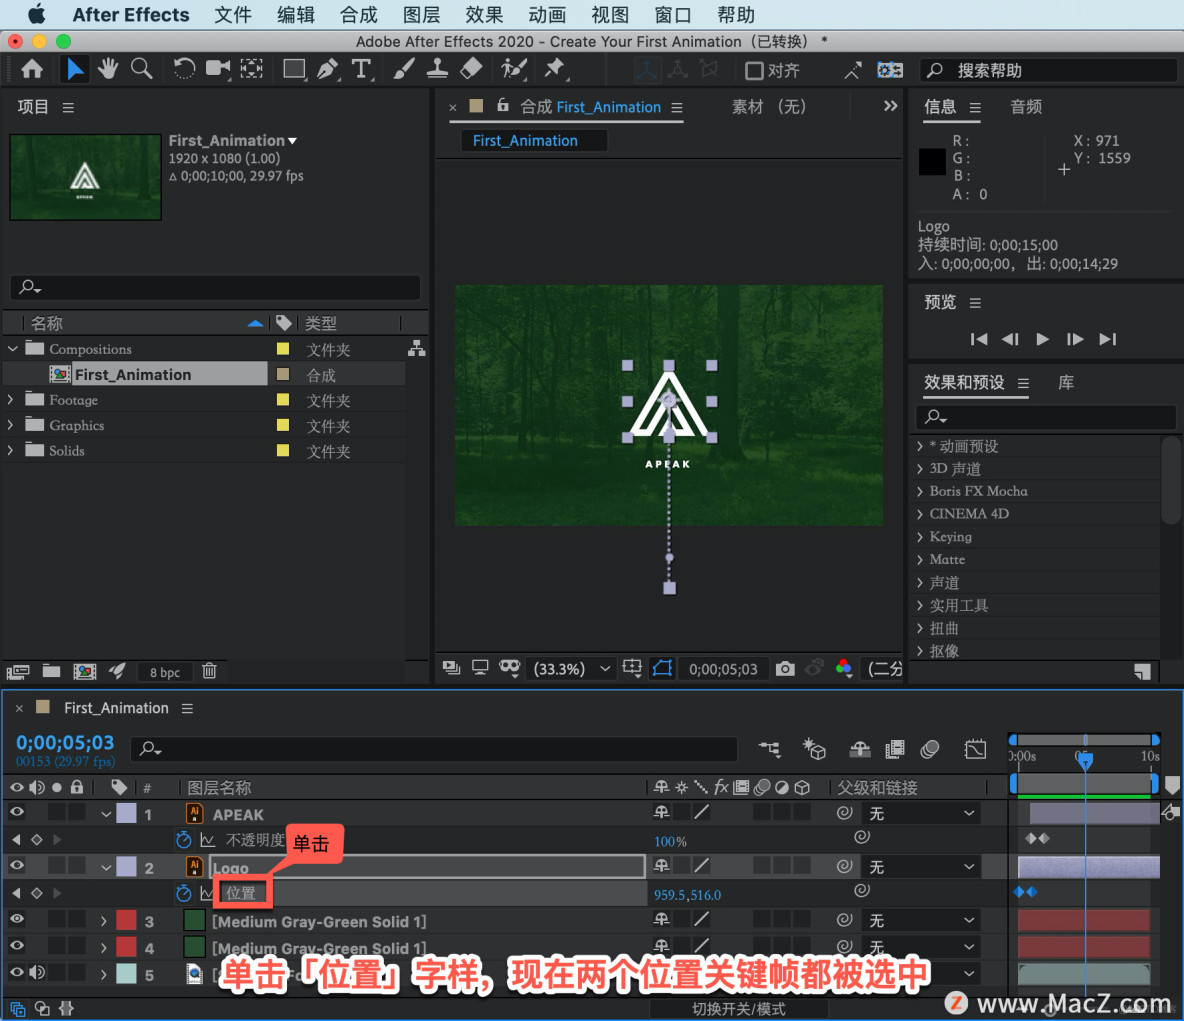 After Effects 教程，如何在 After Effects 中创建动画？_windows软件下载_09